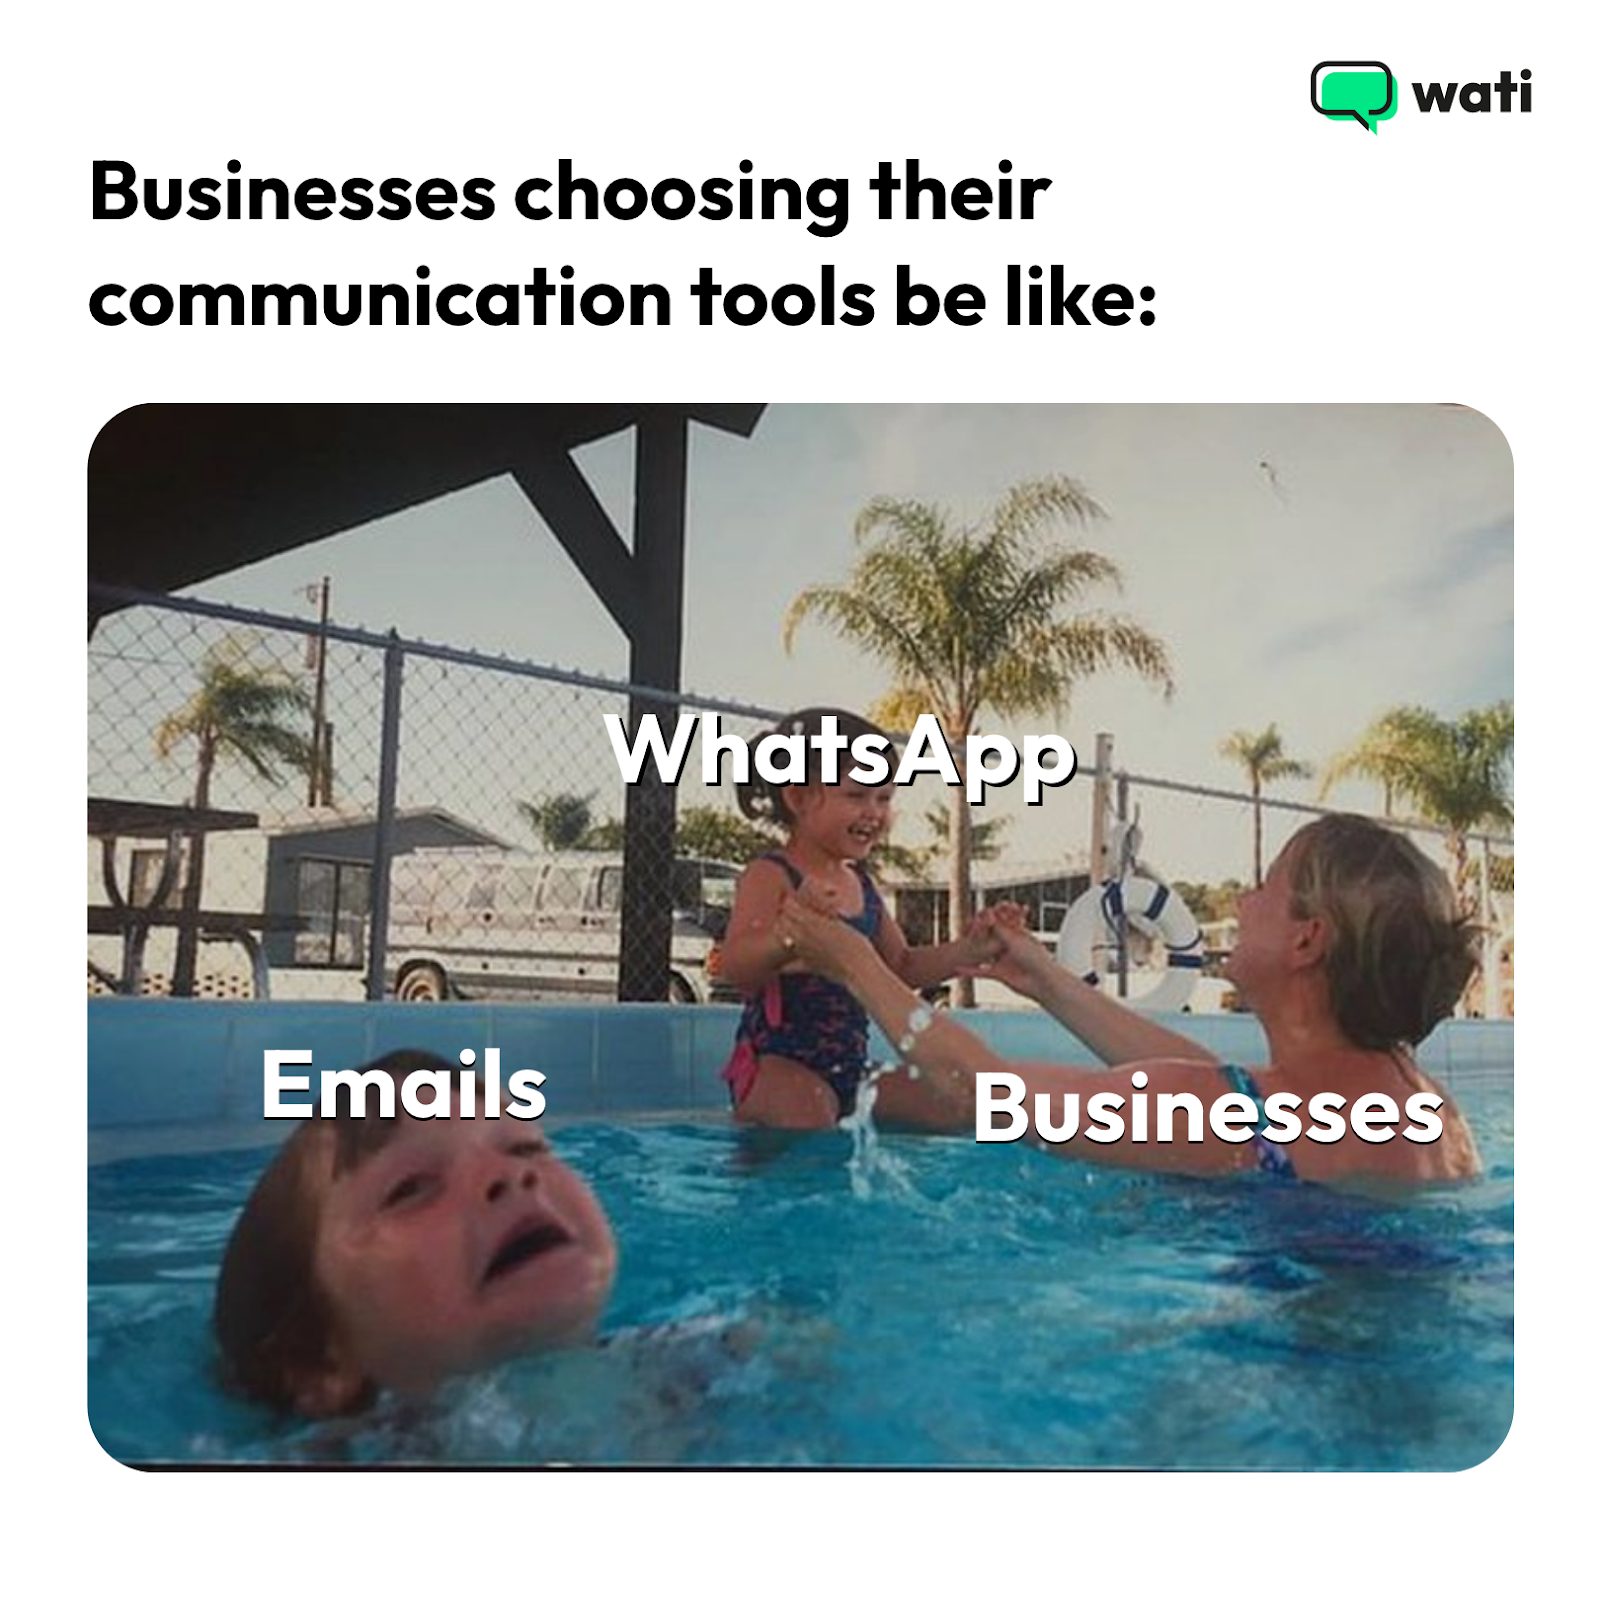 A funny meme about email and WhatsApp